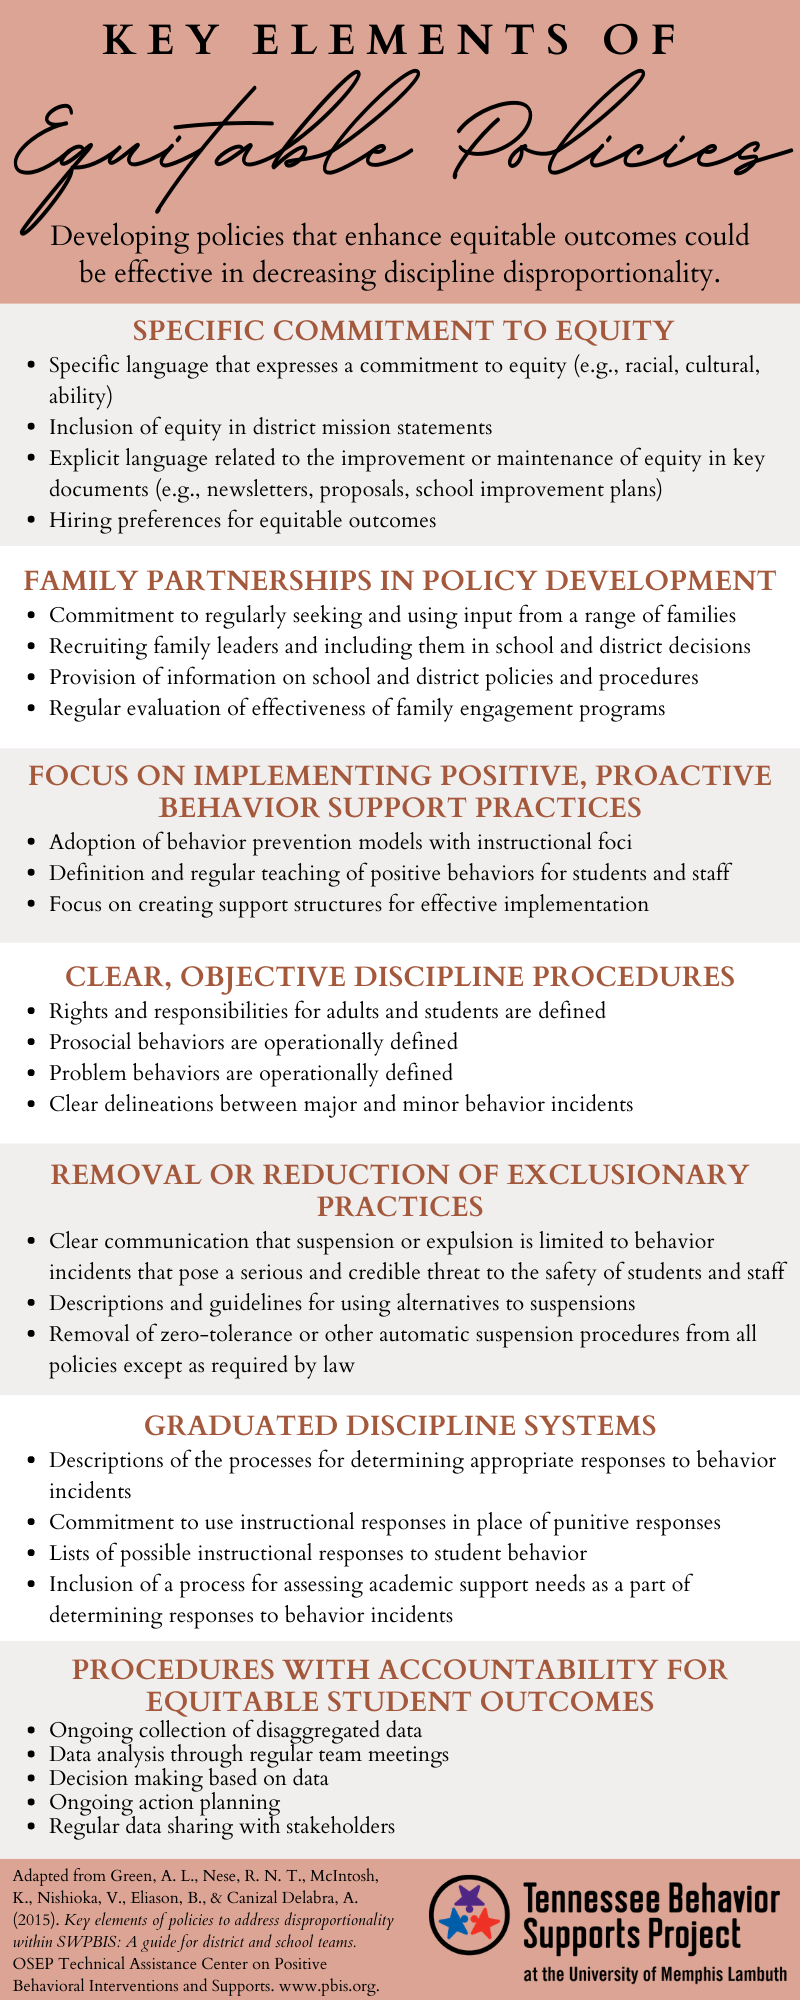 Infographic: Key Elements of Equitable Policies. Click to download a PDF version of this image.